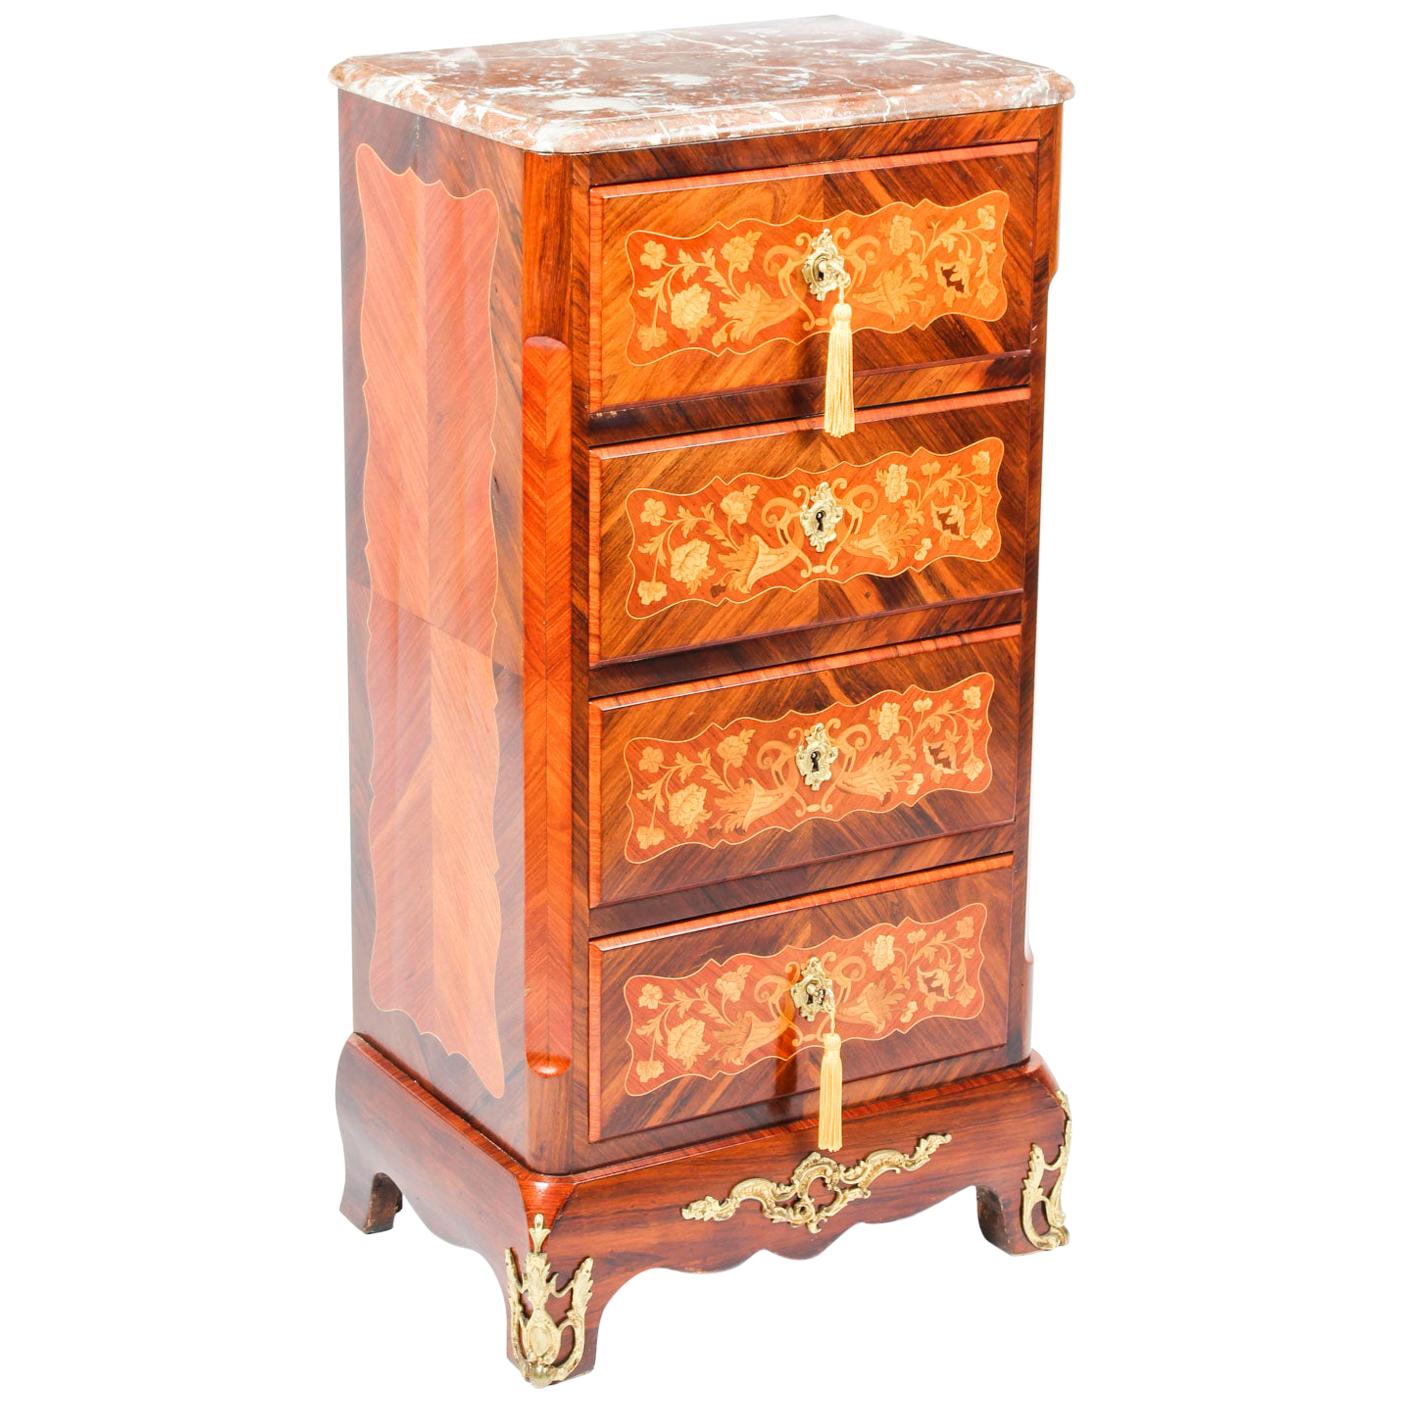 19th Century French Ormolu Mounted Marquetry Secretaire Chest